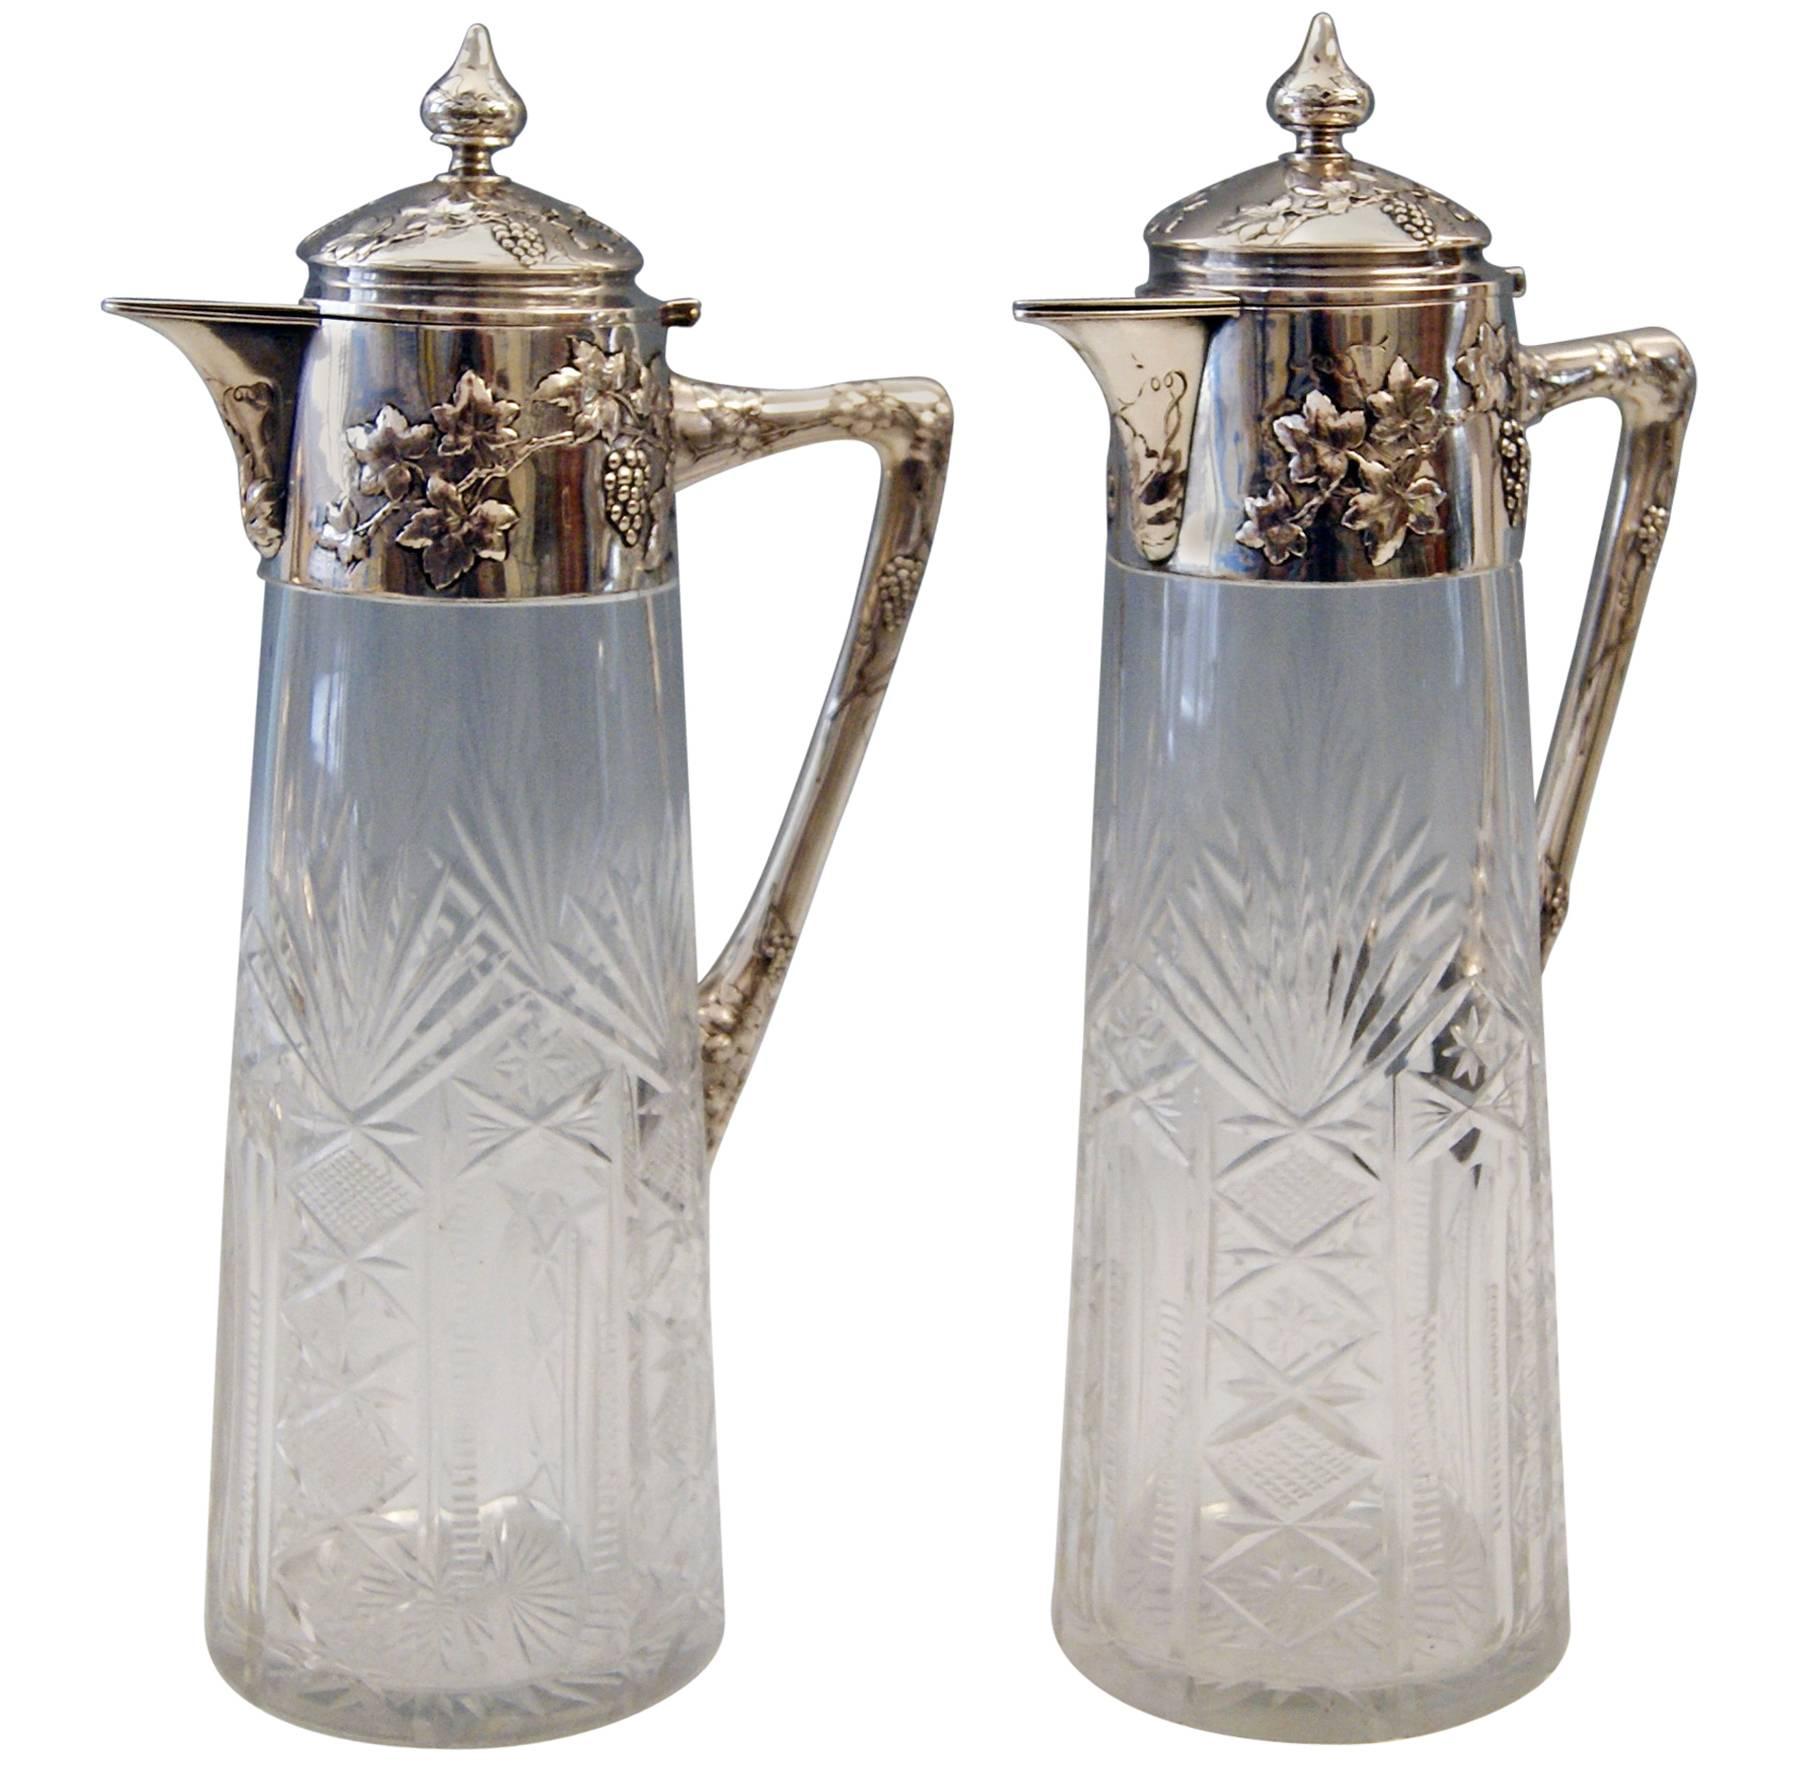  Silver Austria Viennese Pair of Glass Decanters Carafes, circa 1900